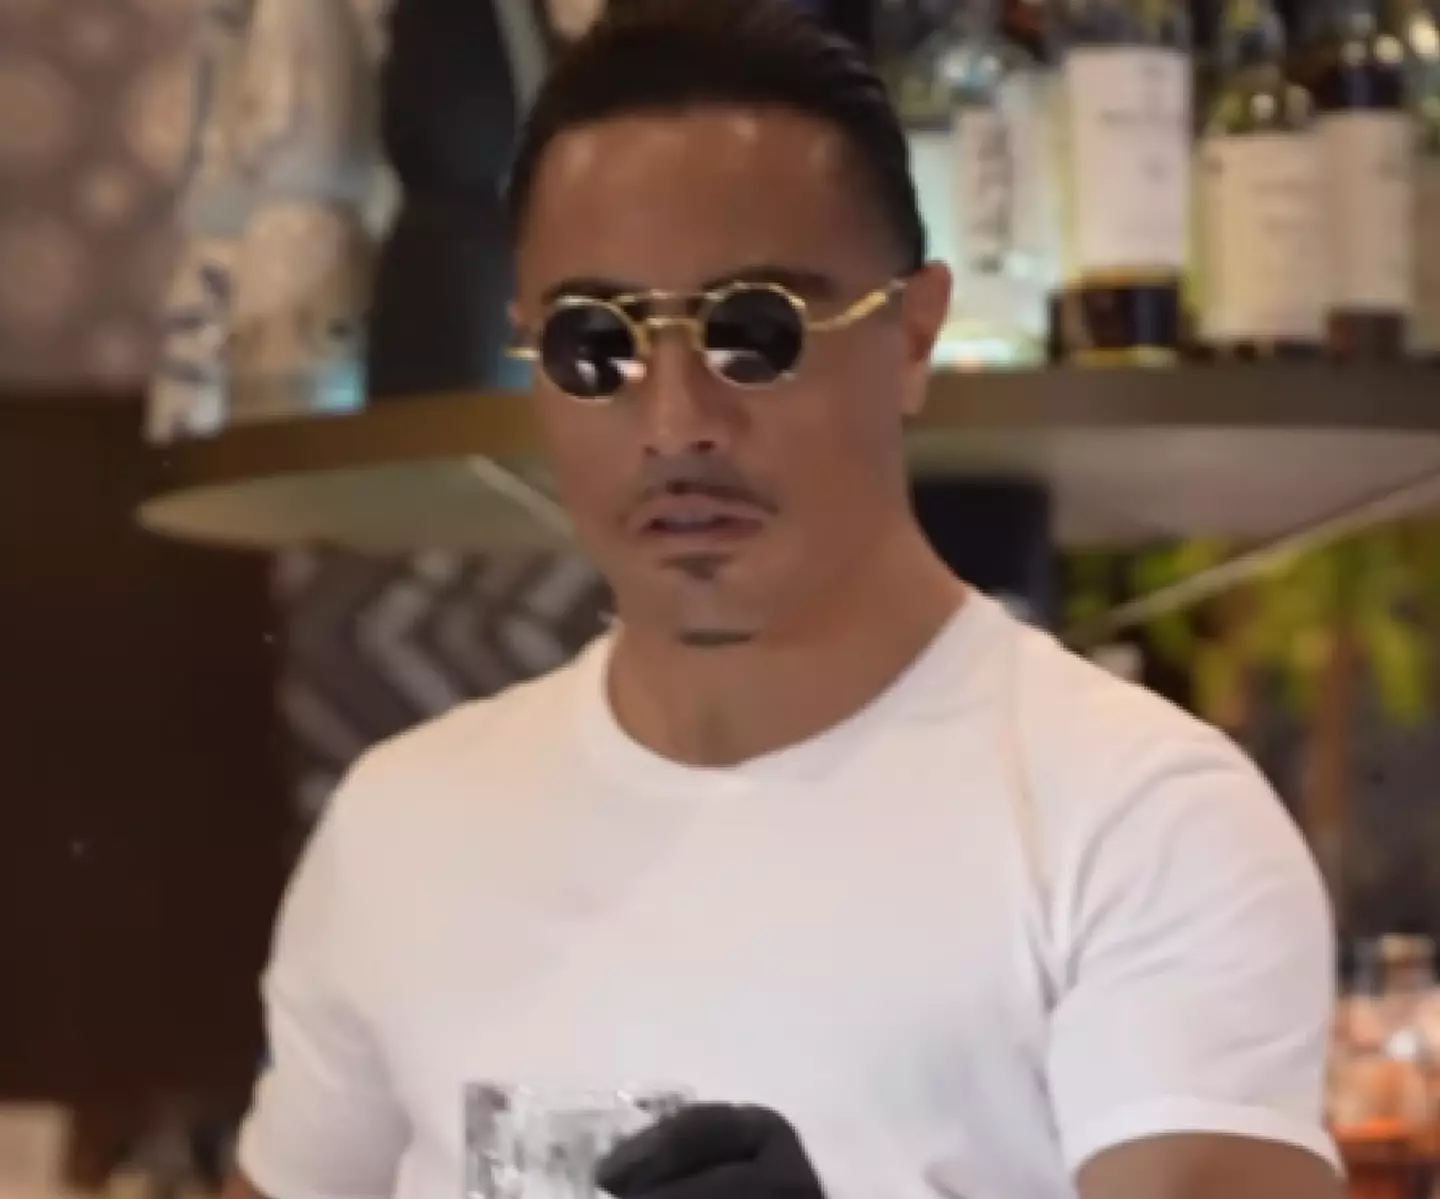 A number of SaltBae's former employees have made allegations against him.